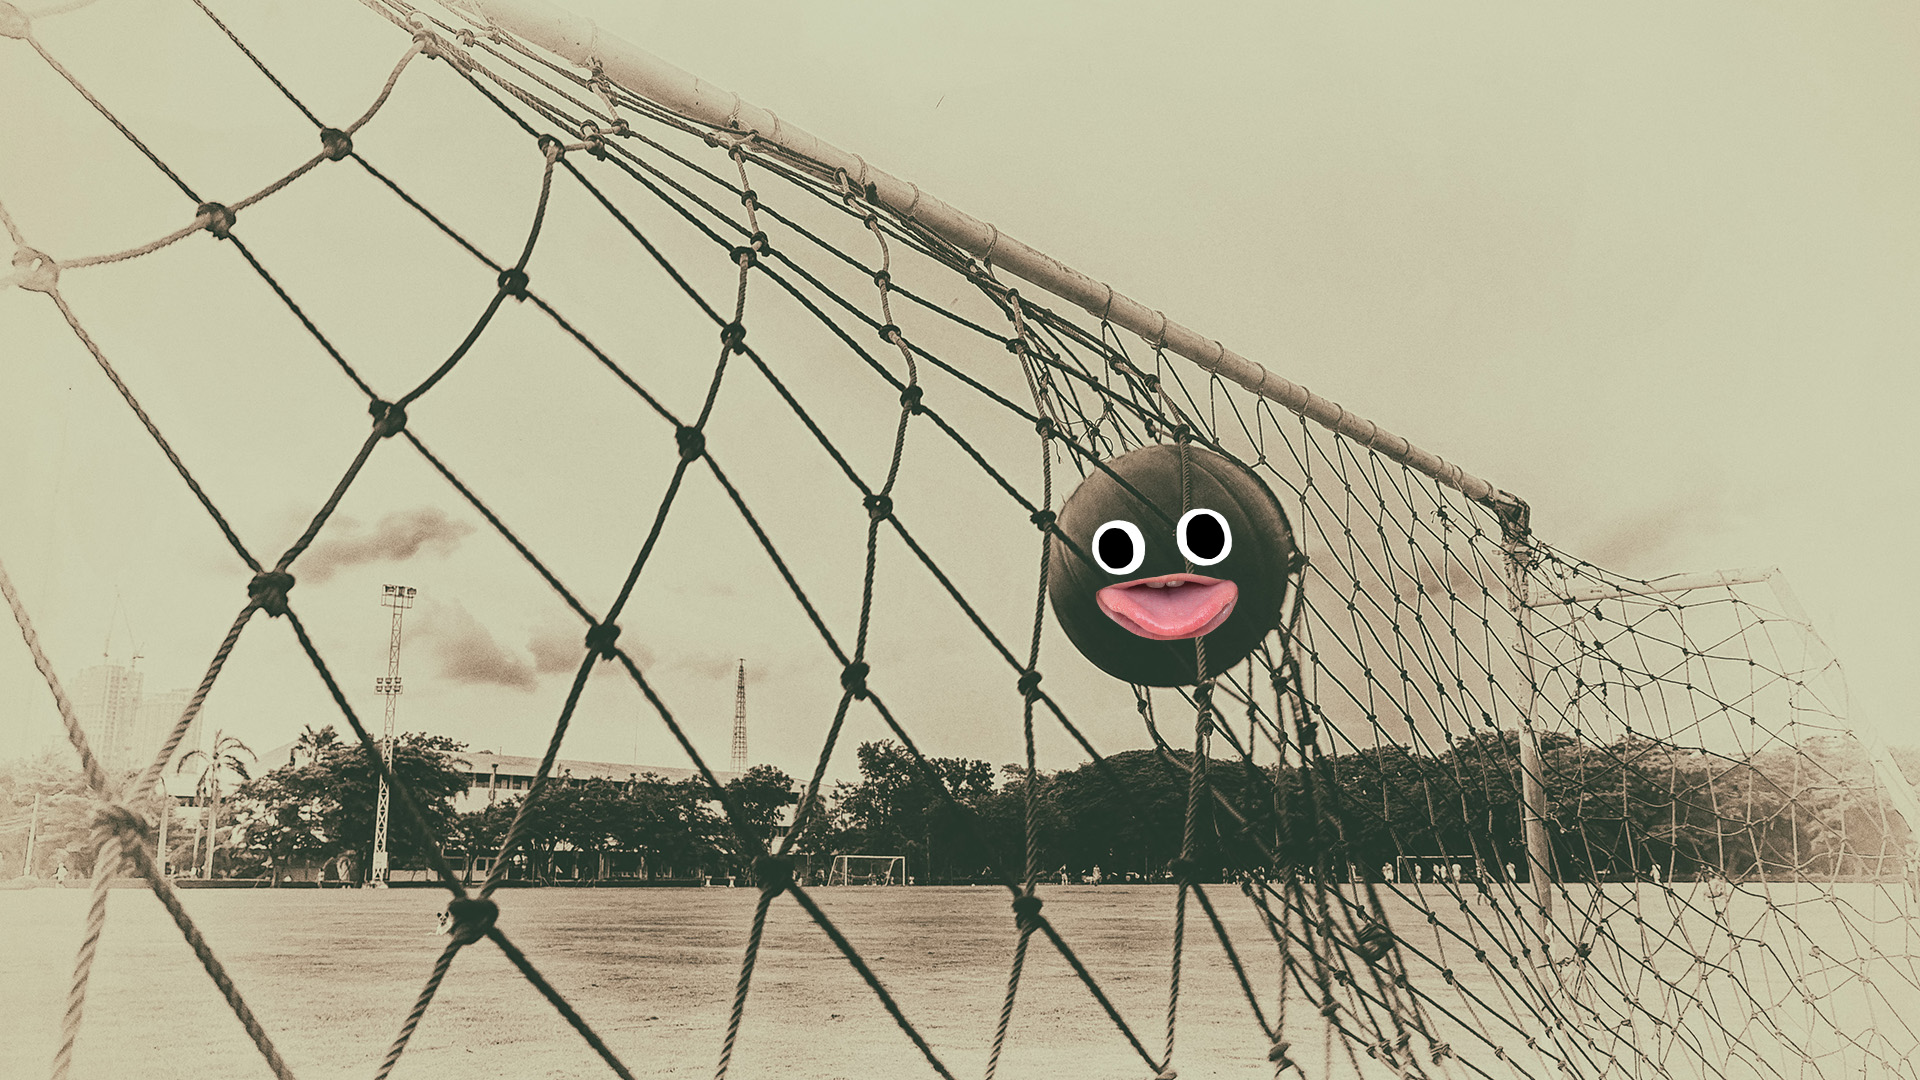 An old photo of a football hitting the back of the net